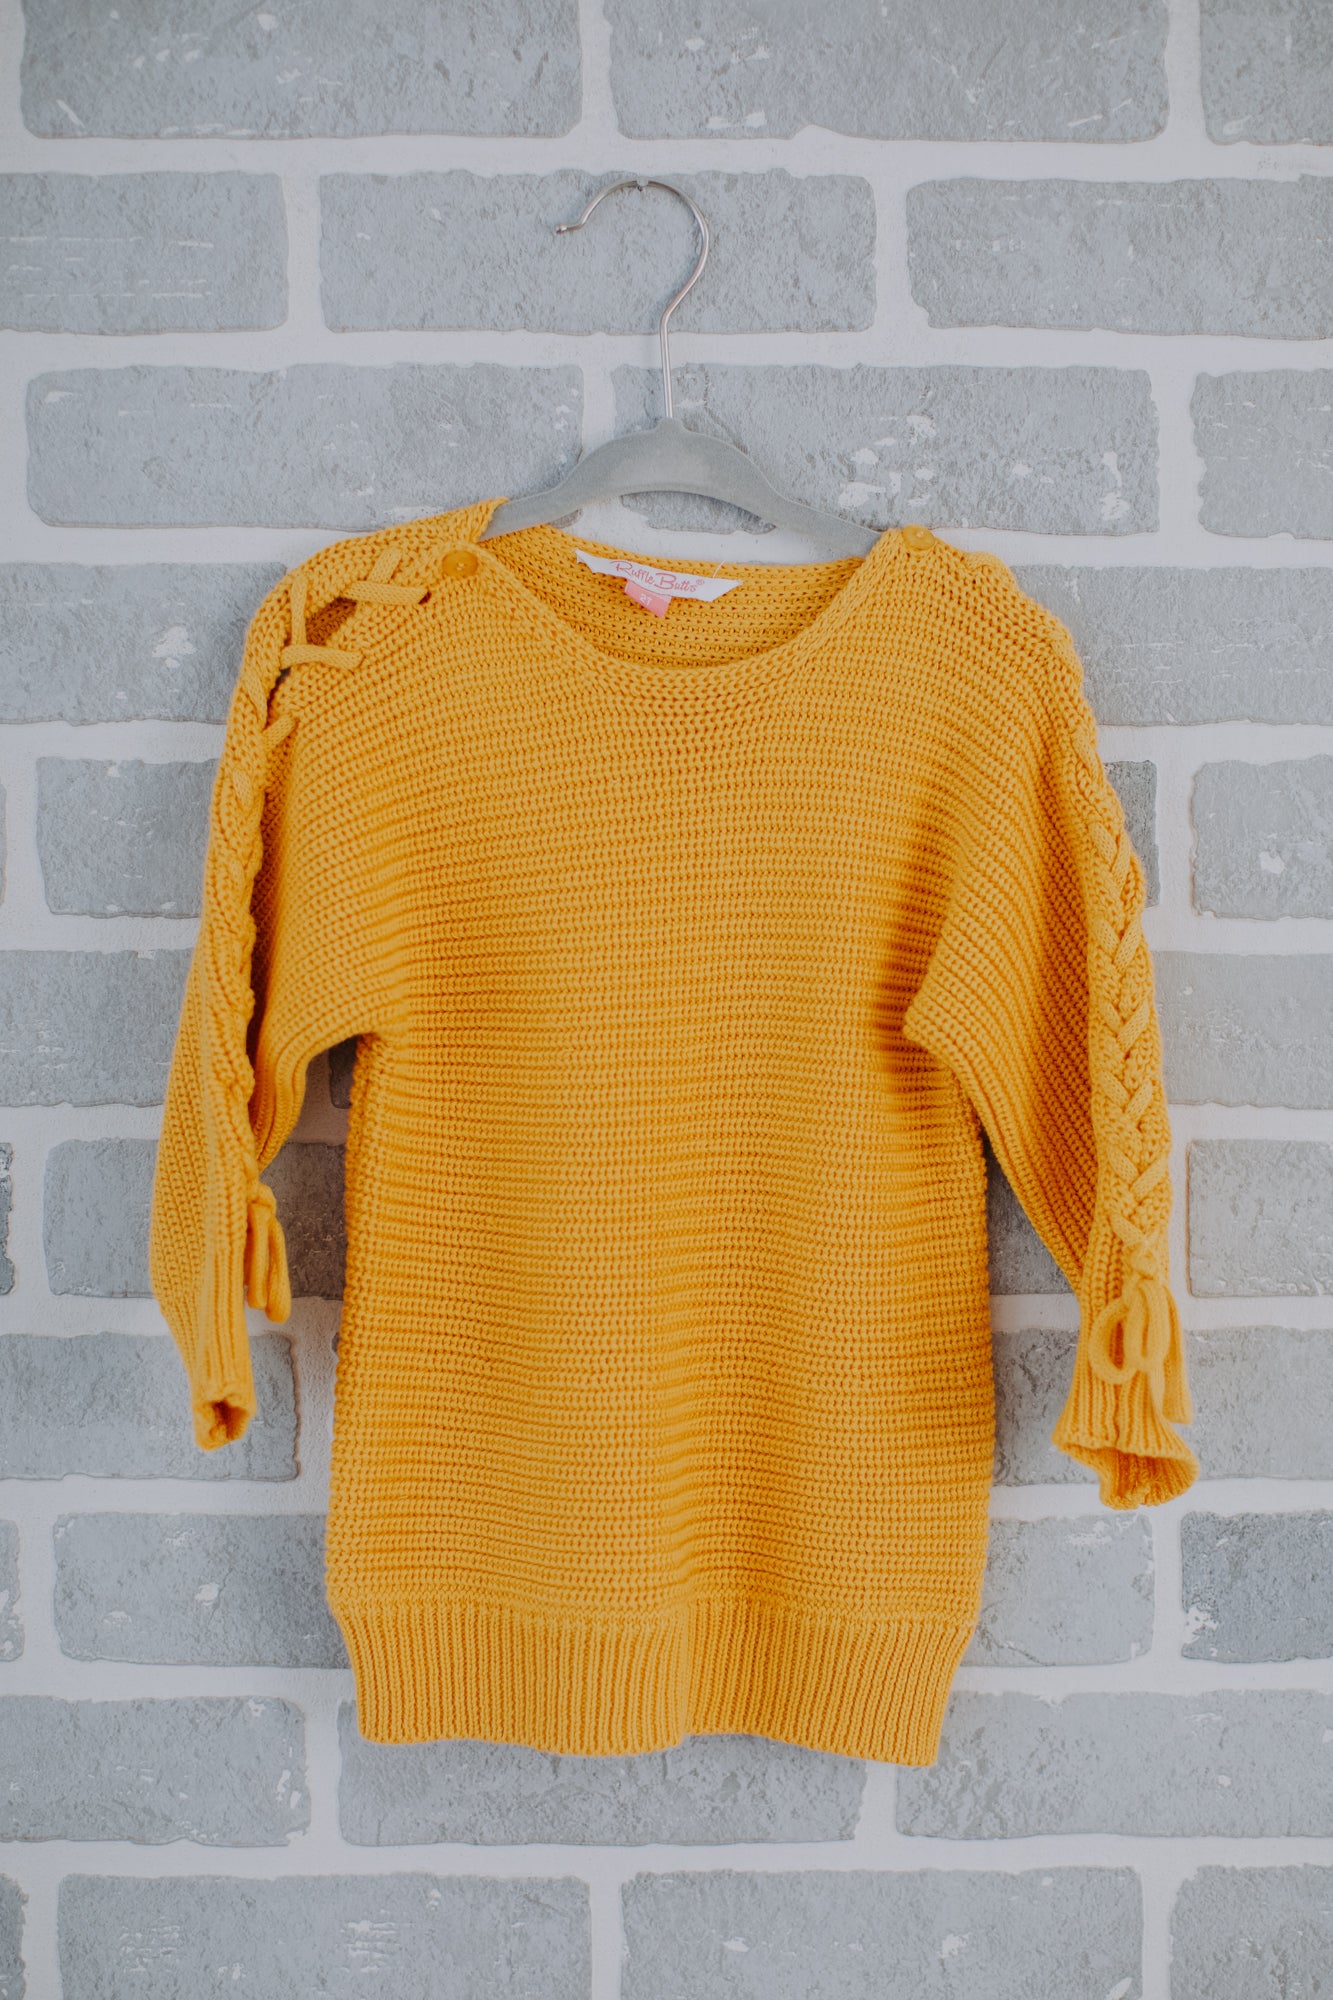 Golden Yellow Lace-Up Sweater Tunic